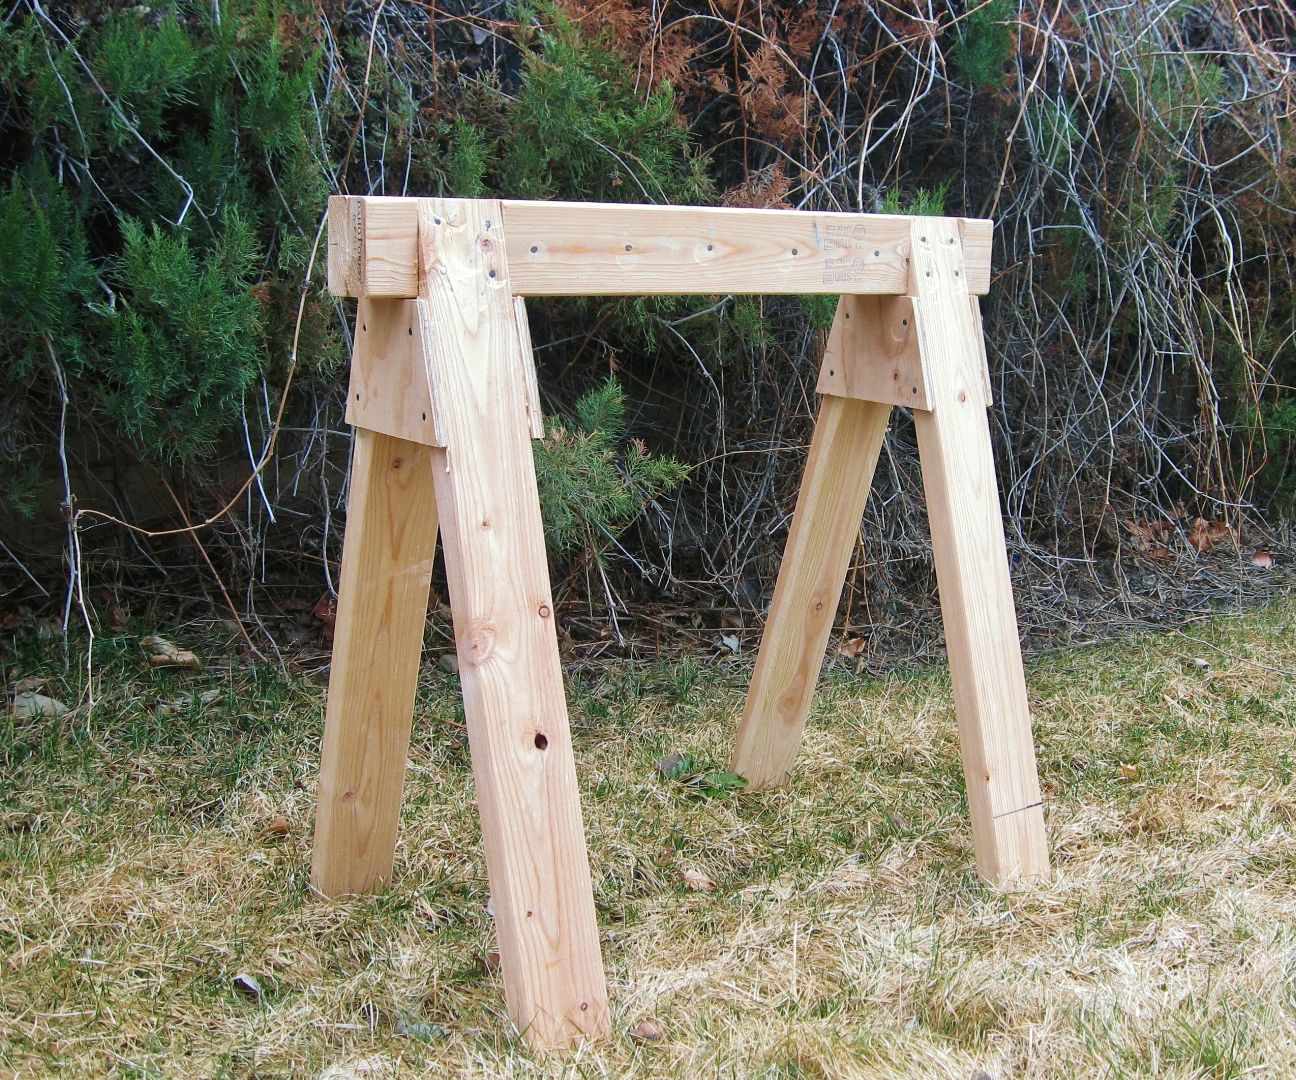 The Best Sawhorse - Strong, Cheap & Easy!